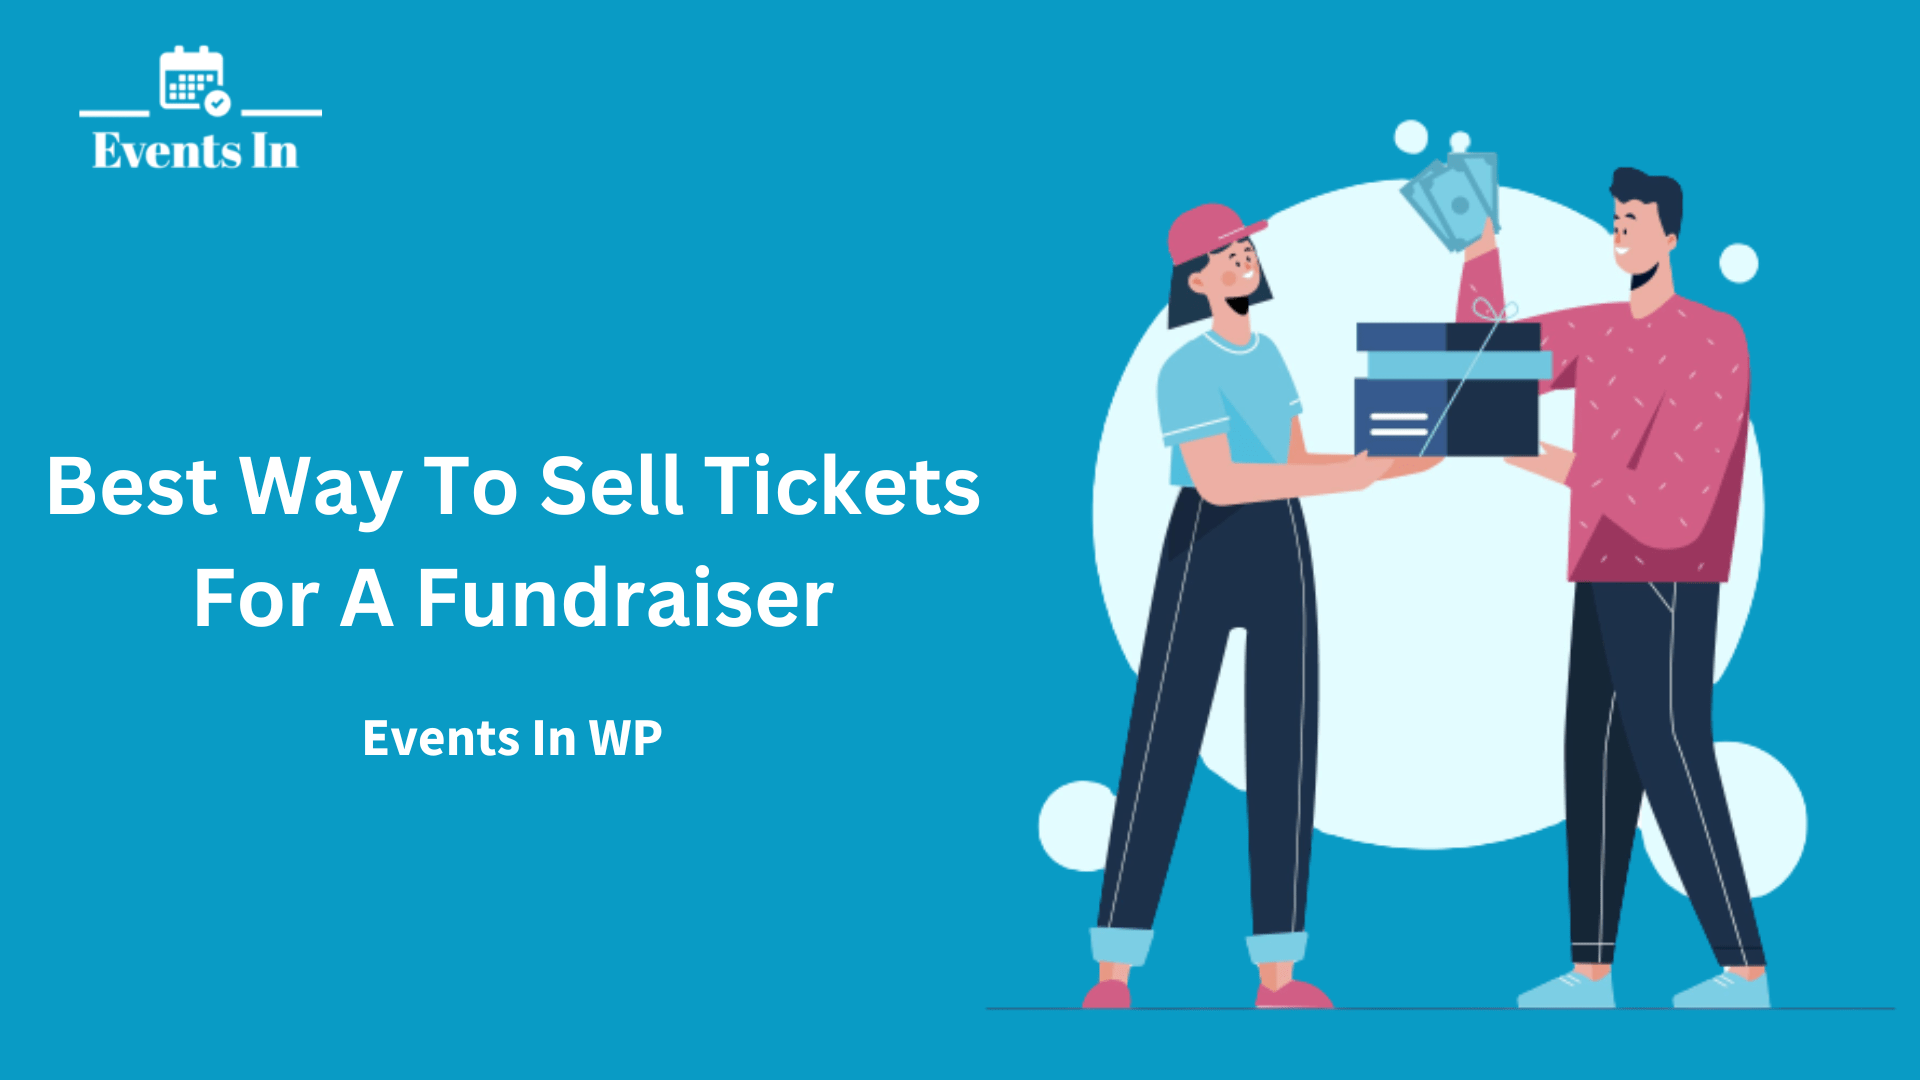 Best Way To Sell Tickets For A Fundraiser